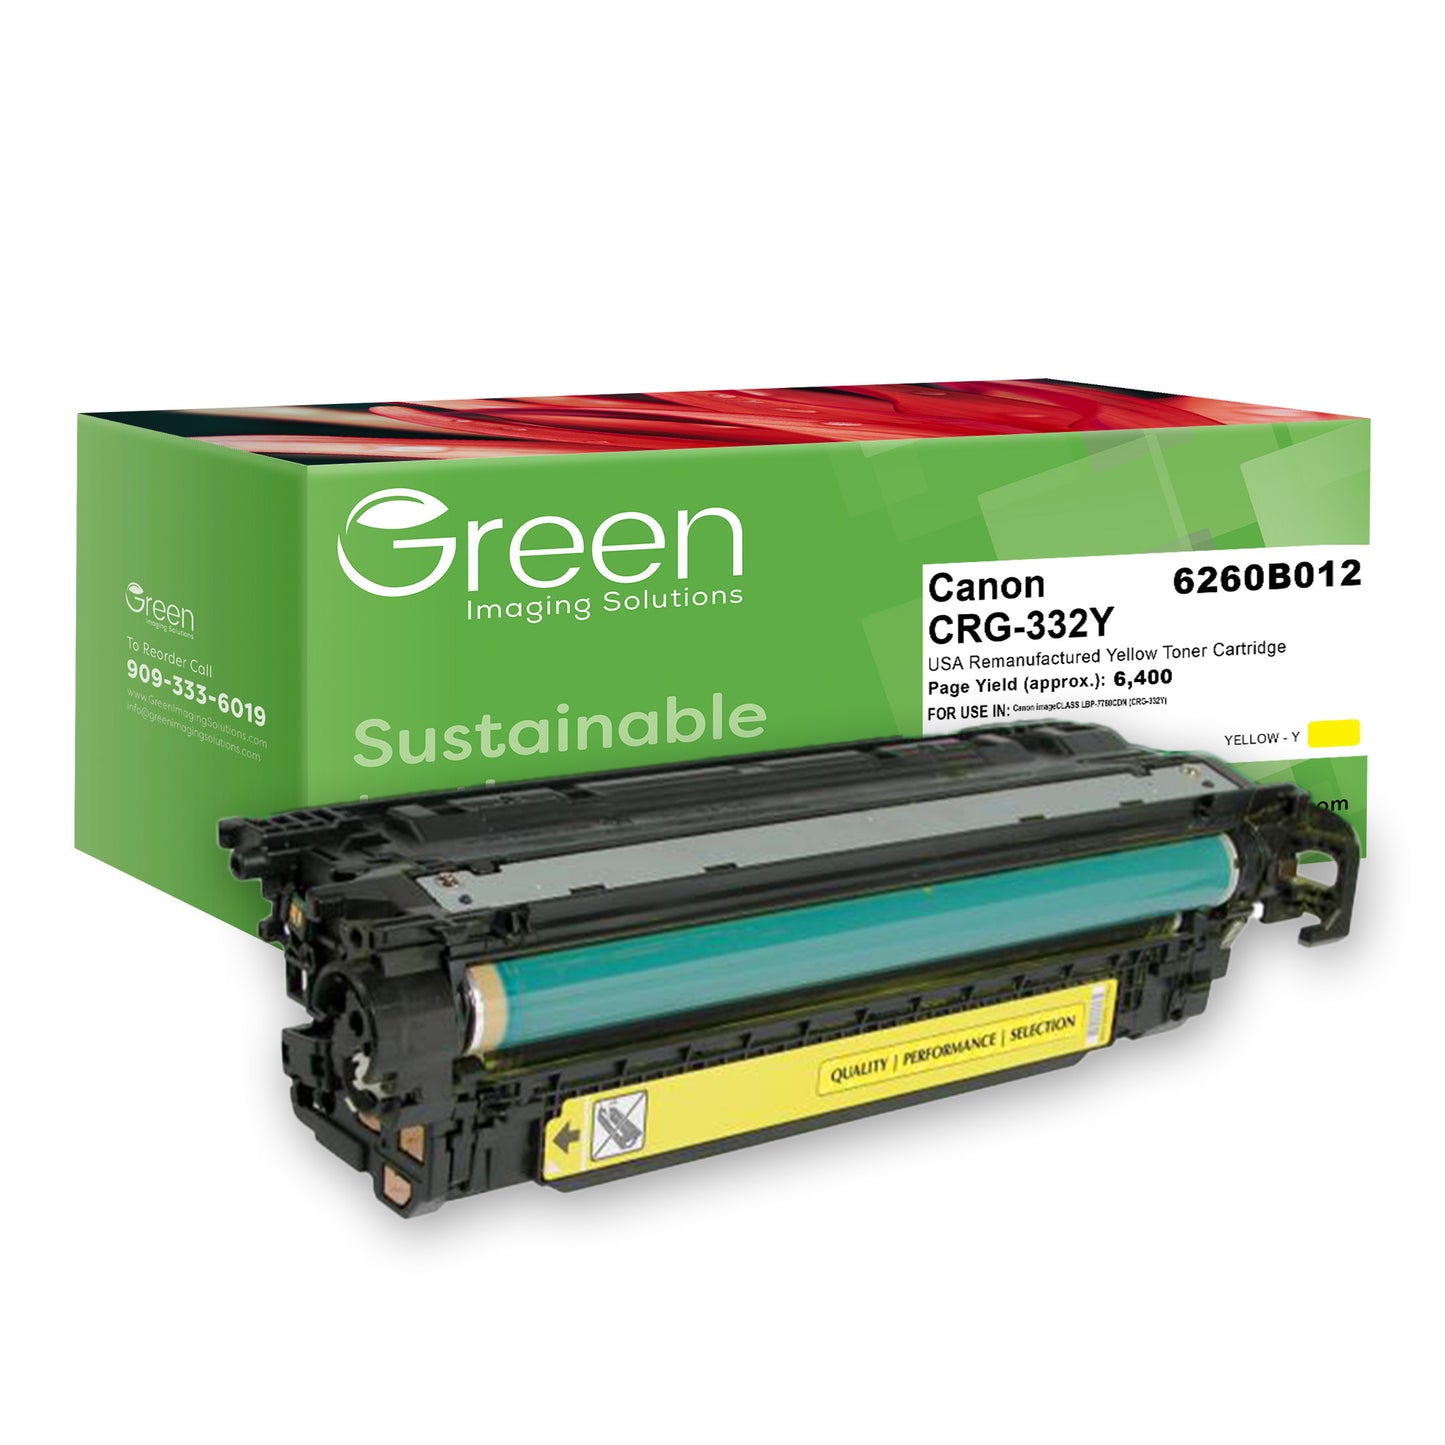 Green Imaging Solutions USA Remanufactured Yellow Toner Cartridge for Canon 6260B012 (CRG-332Y)